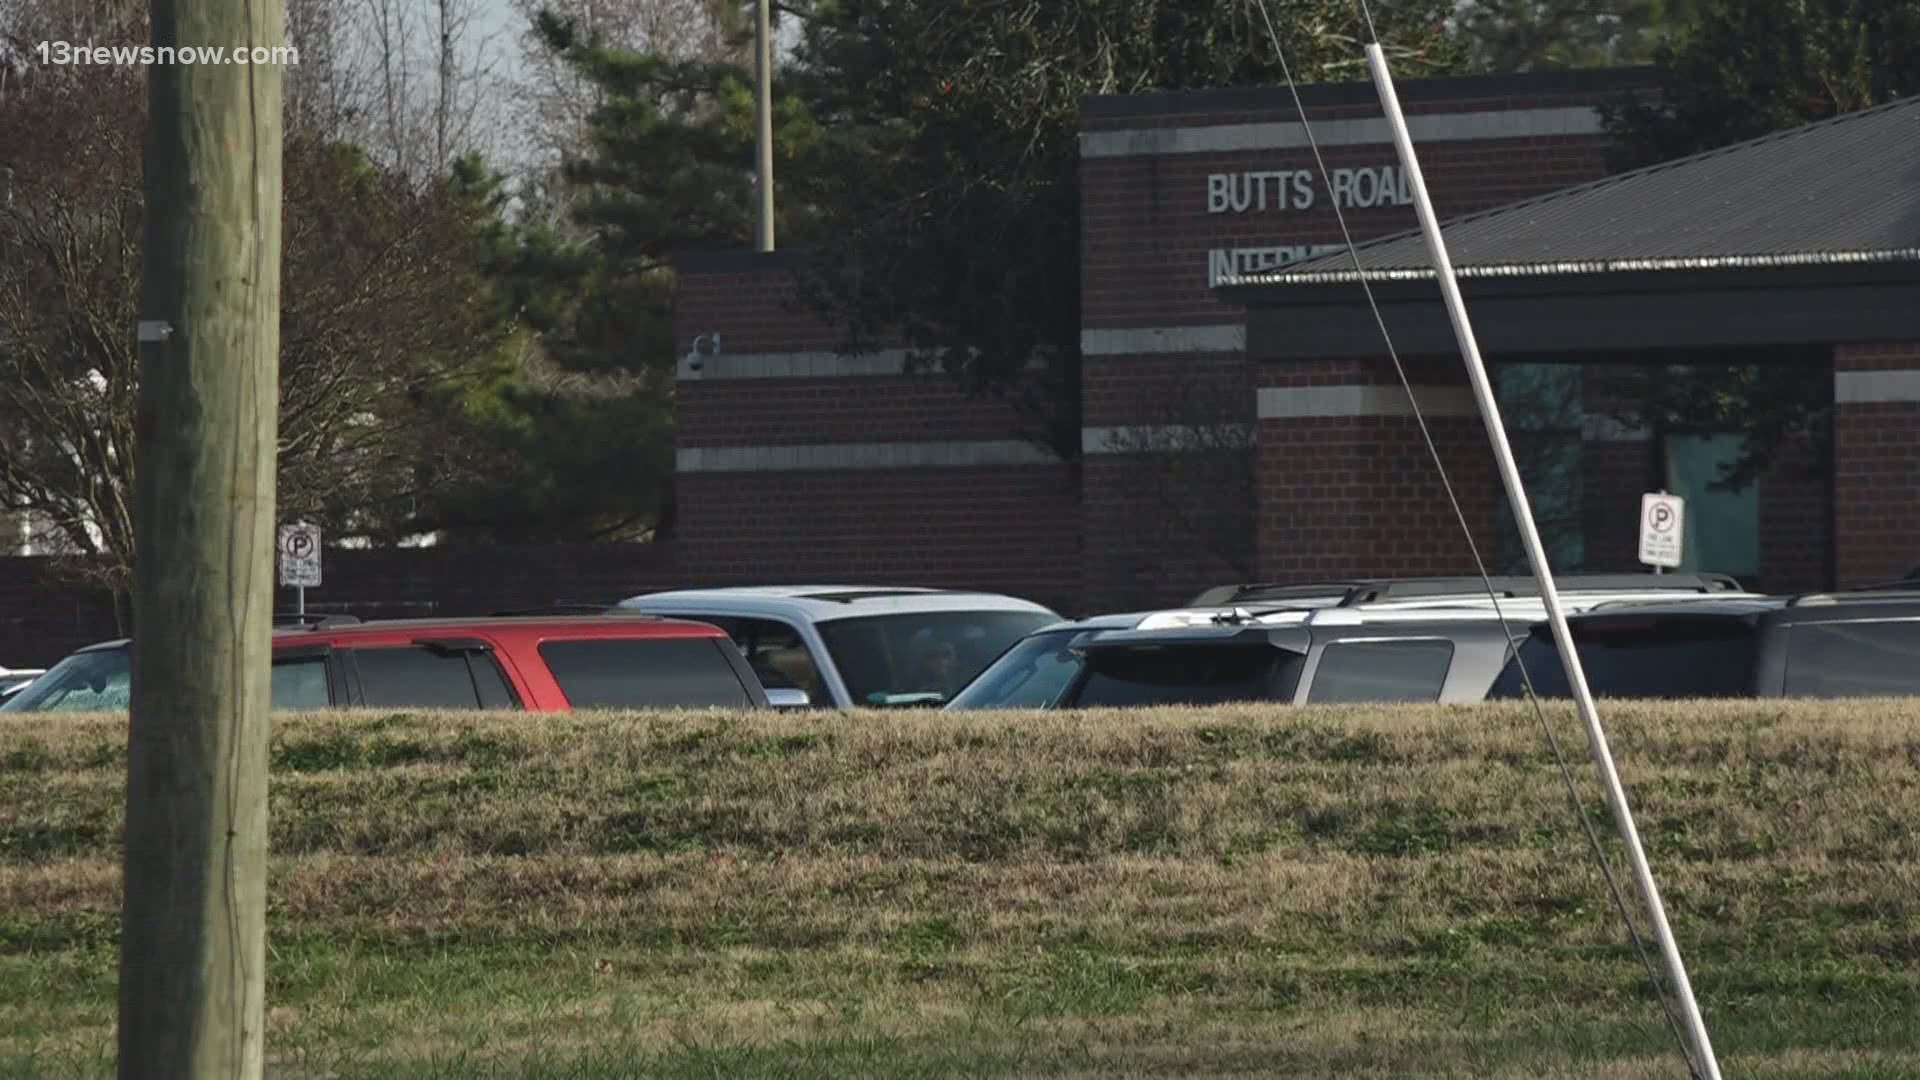 In Chesapeake, 140 students and staff quarantined due to 6 positive coronavirus cases at Butts Road Intermediate School, but no there was no link between the cases.